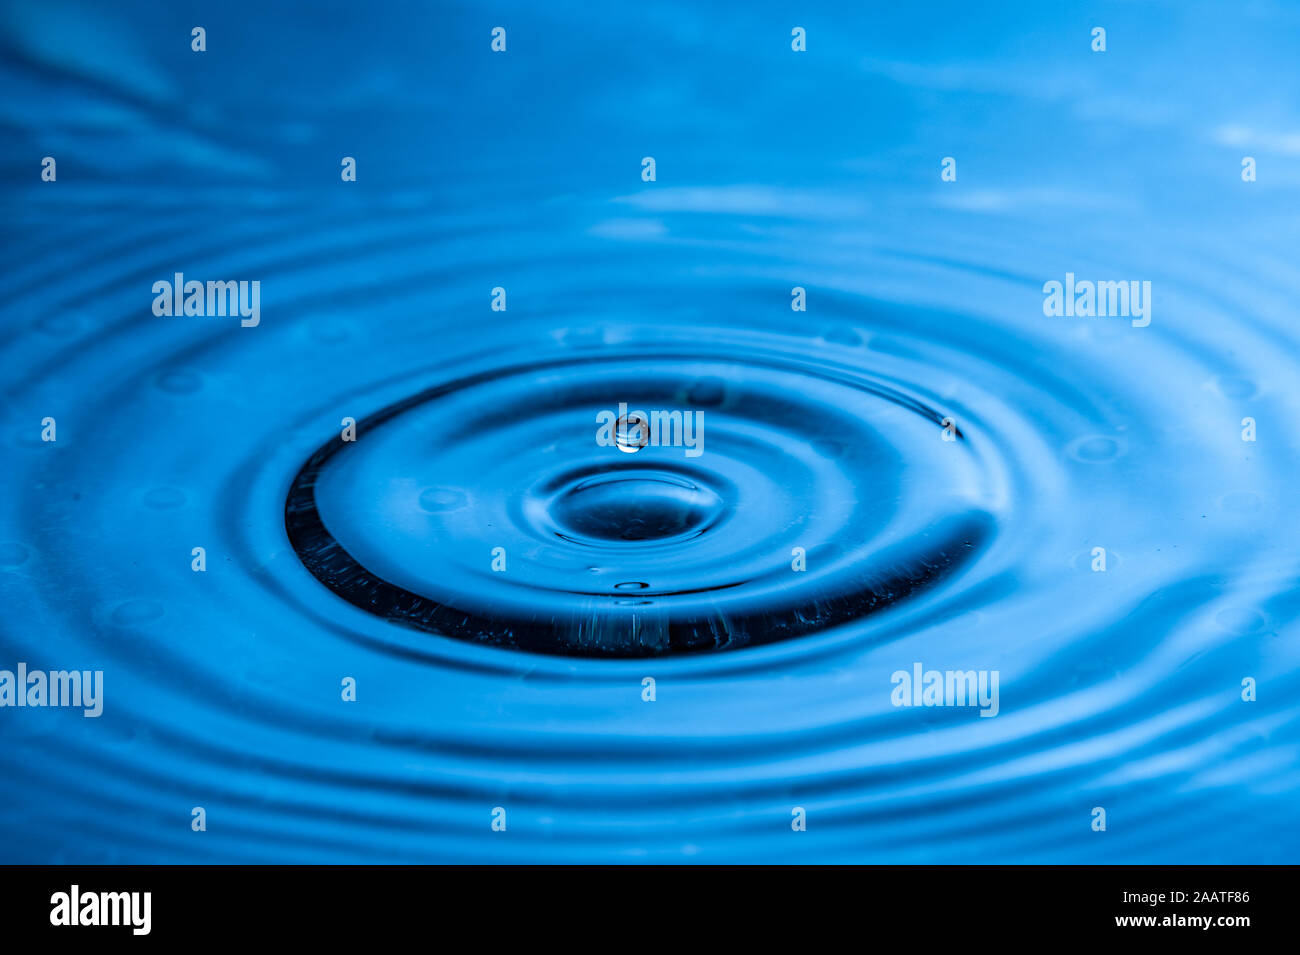 High speed water drop photography. Blue with single drop about to splash Stock Photo